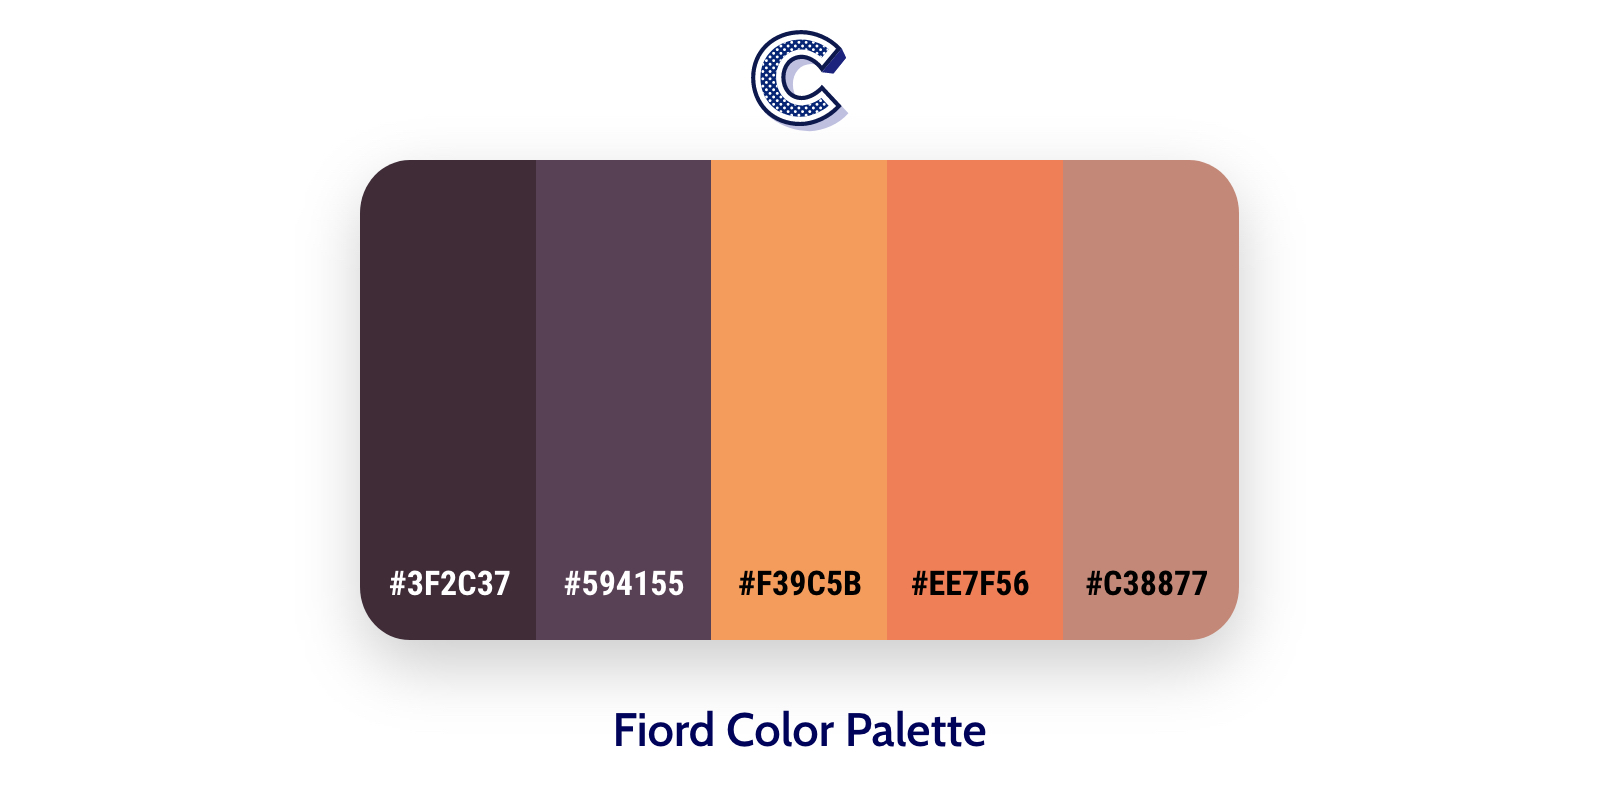 the featured image of fiord color palette